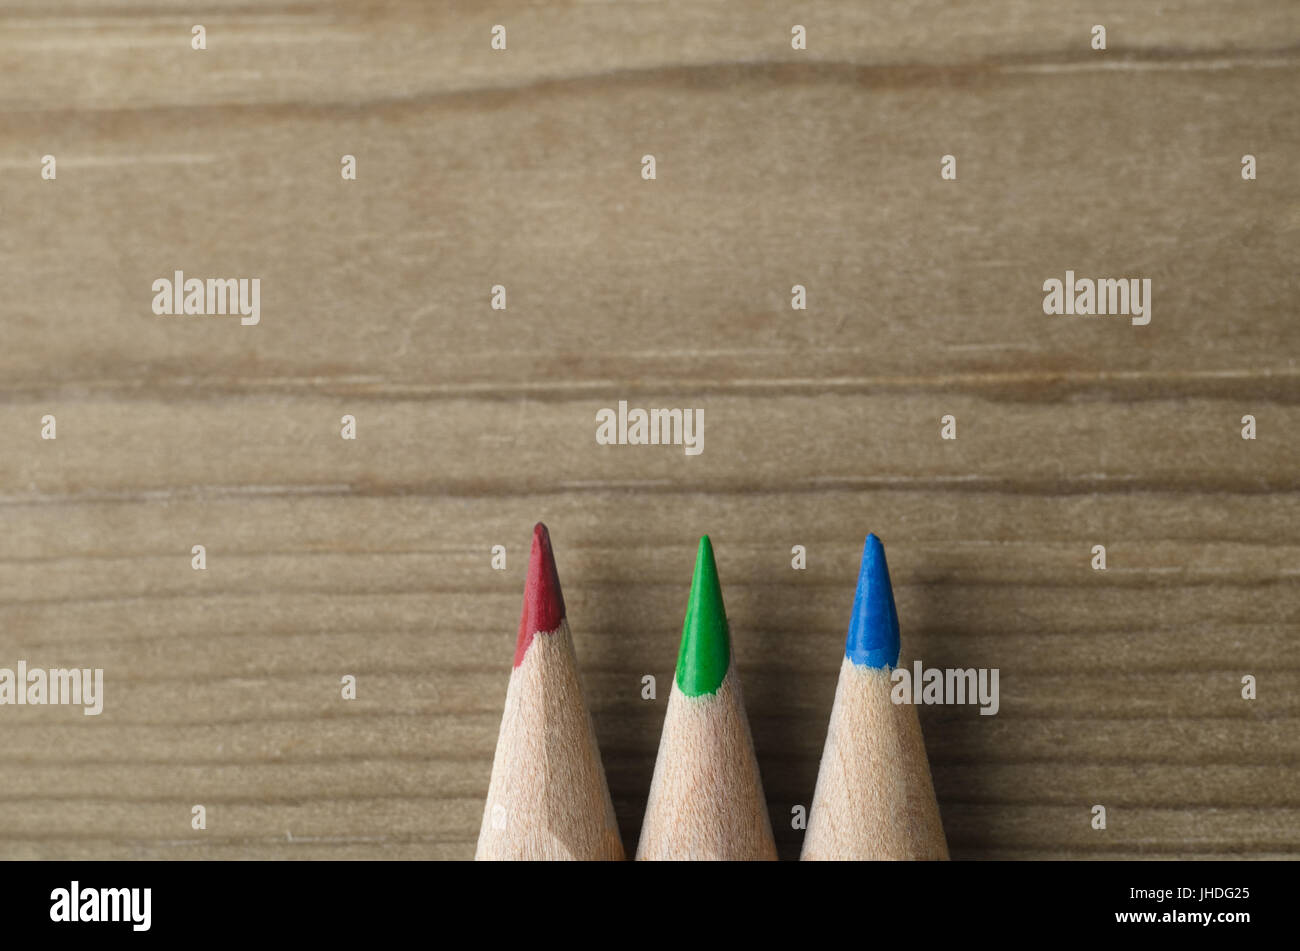 Three colour pencils pointing upwards into wooden background copy space. Represents the light-based RGB colour model. Stock Photo